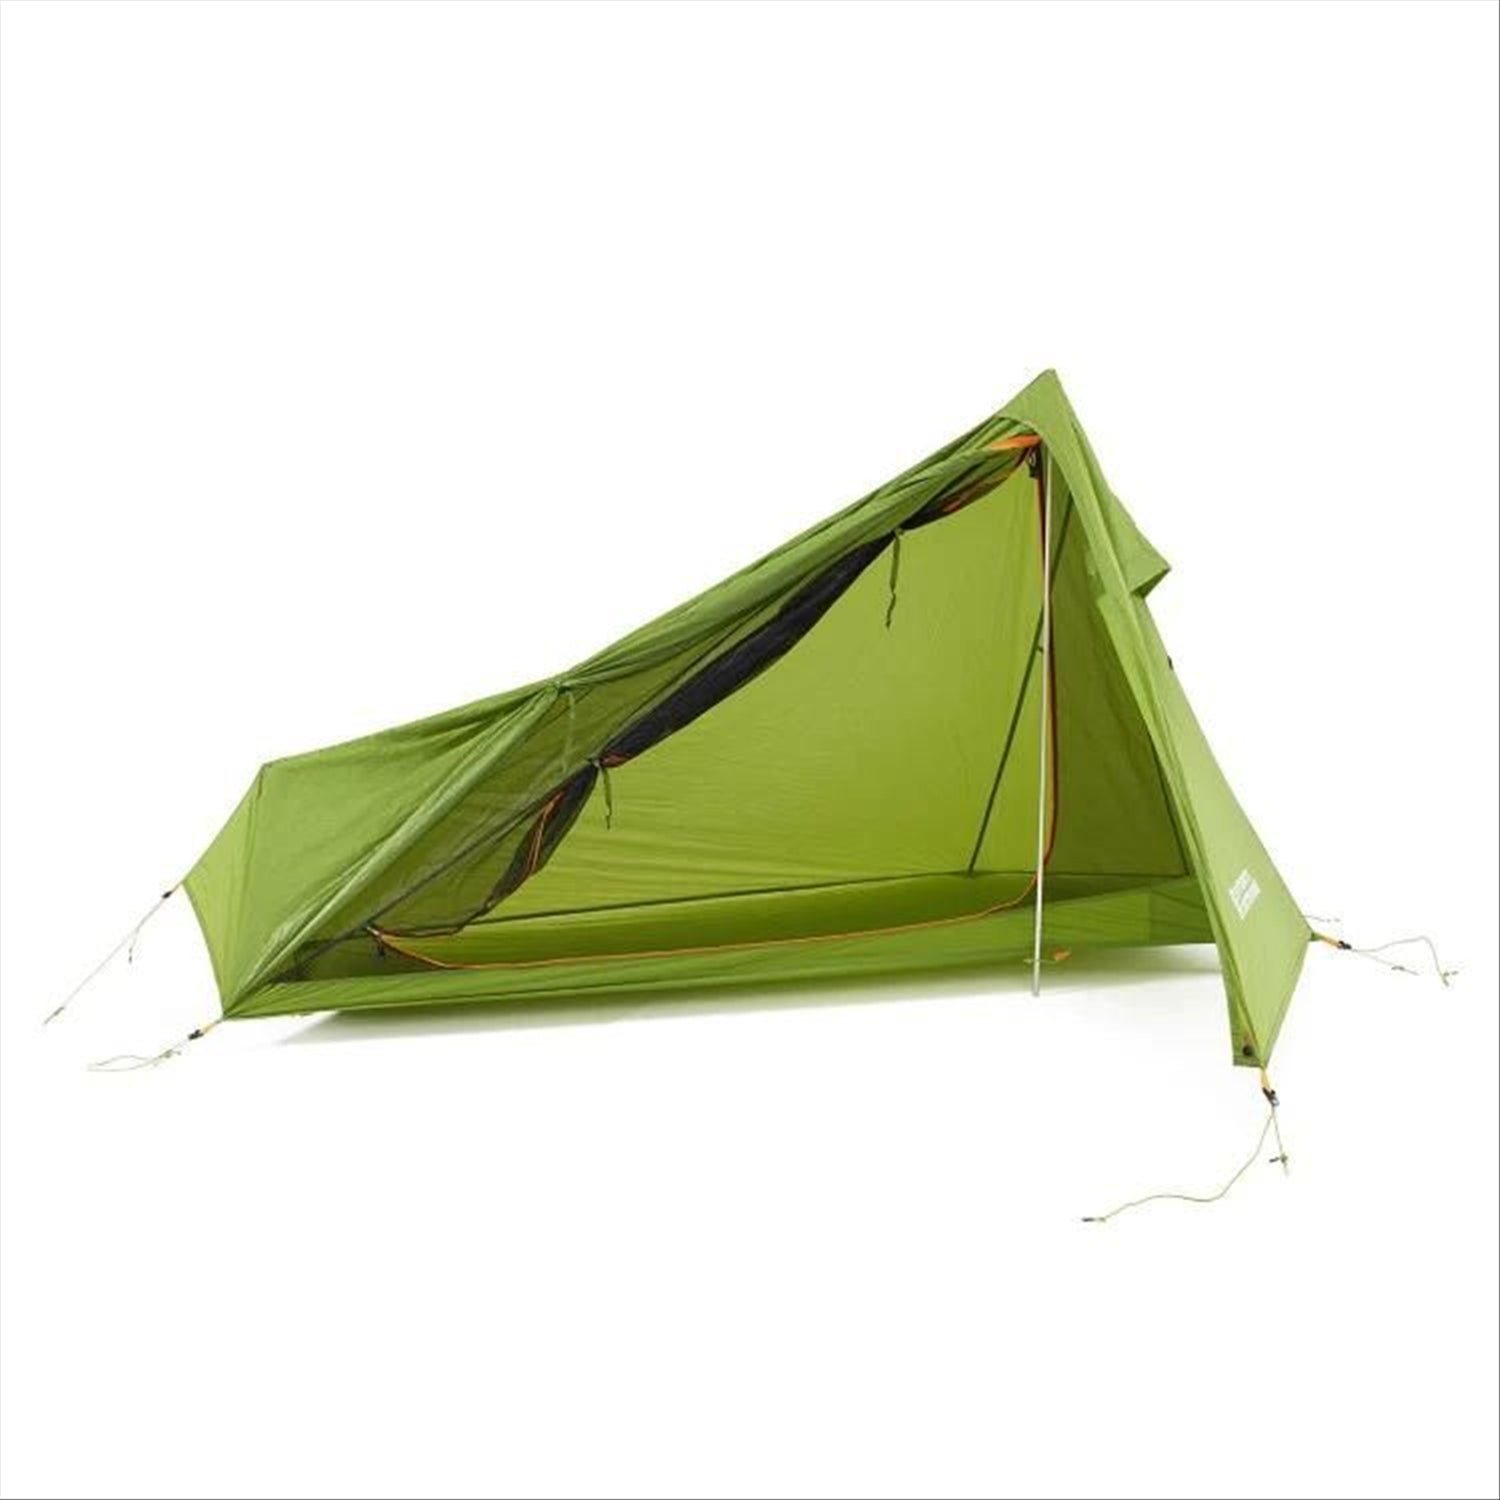 Intents Outdoors Ultrapack SW 1 Person Lightweight Camping Tent